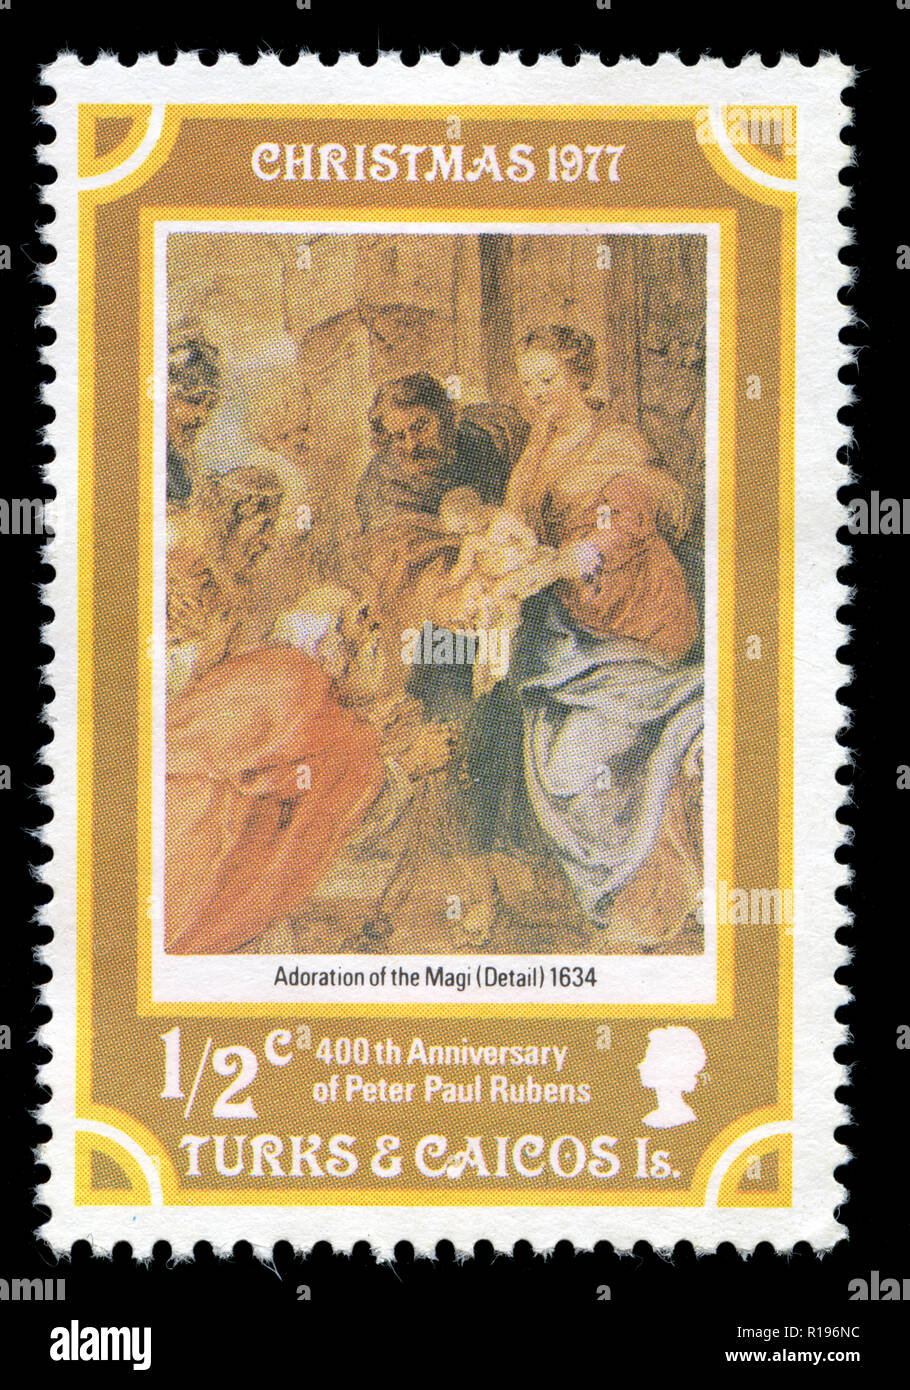 Postage stamps from the Turks and Caicos Islands in the Christmas 1977 series, 400th Anniversary of Peter Paul Rubens Stock Photo